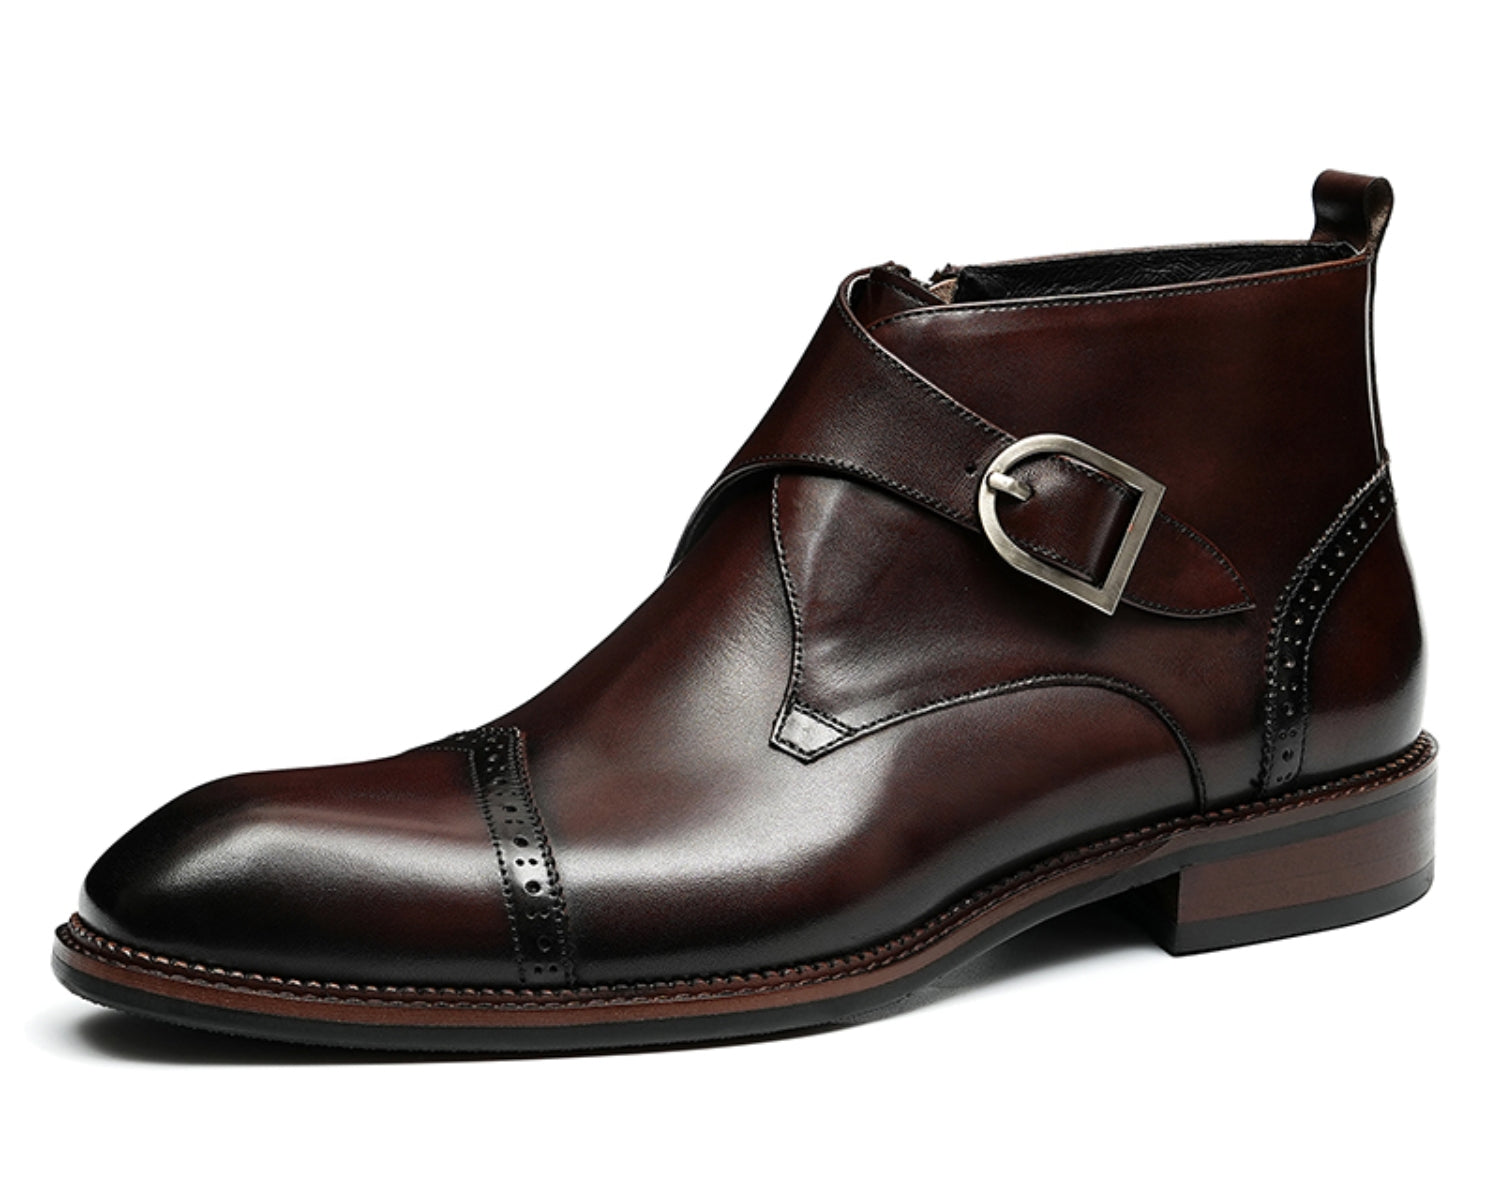 Men's single monk strap dress boots in various styles including manner, old, and skin boots13